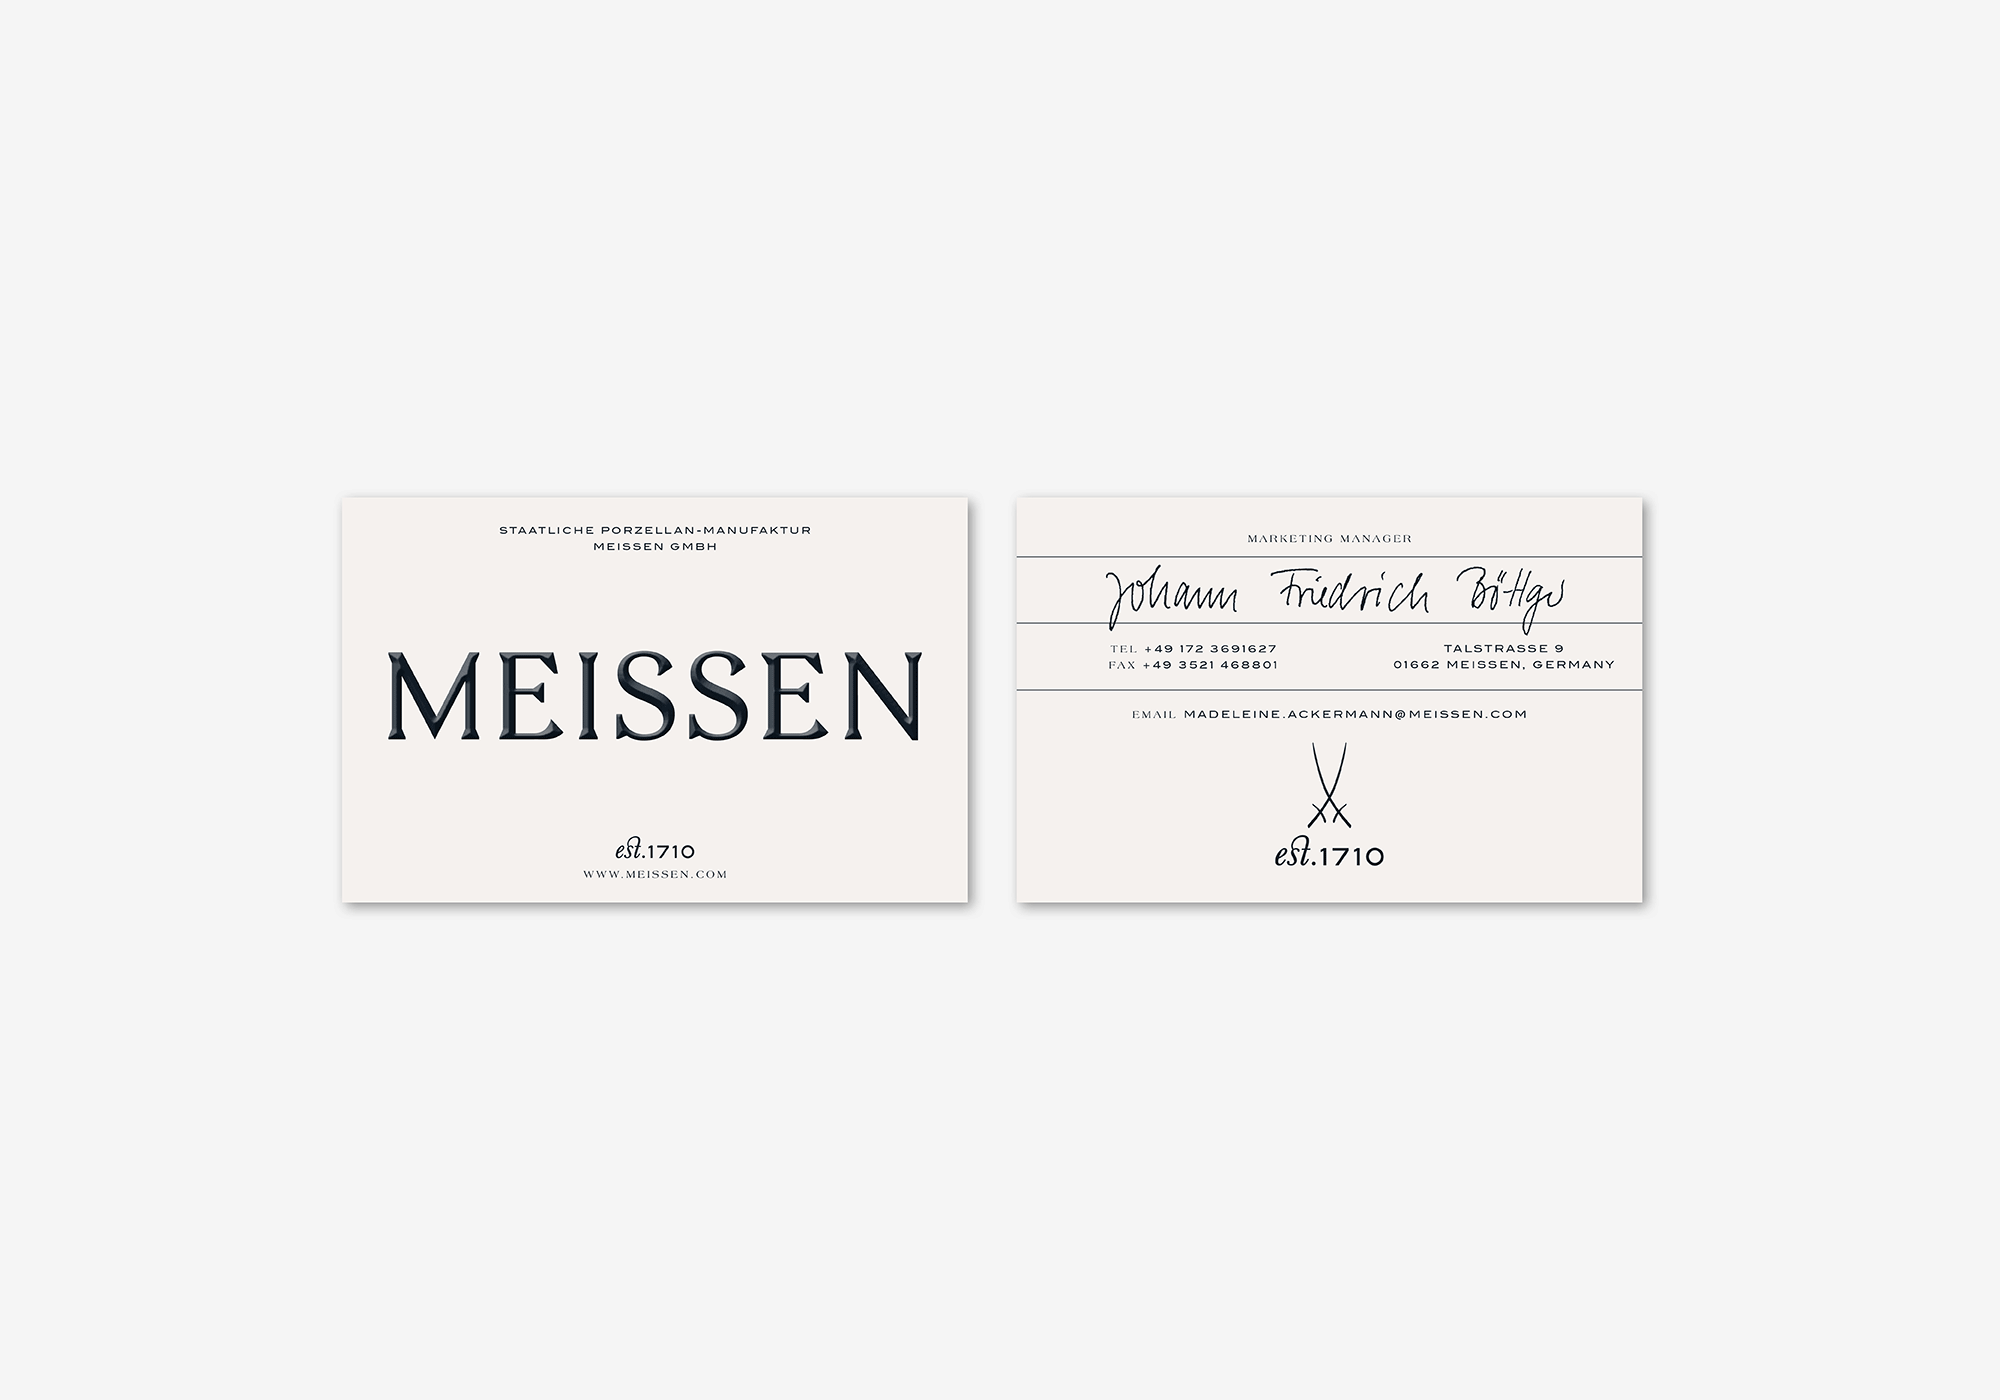 Meissen Logo - The Gaabs, Berlin design agency and creative consultancy. | The ...